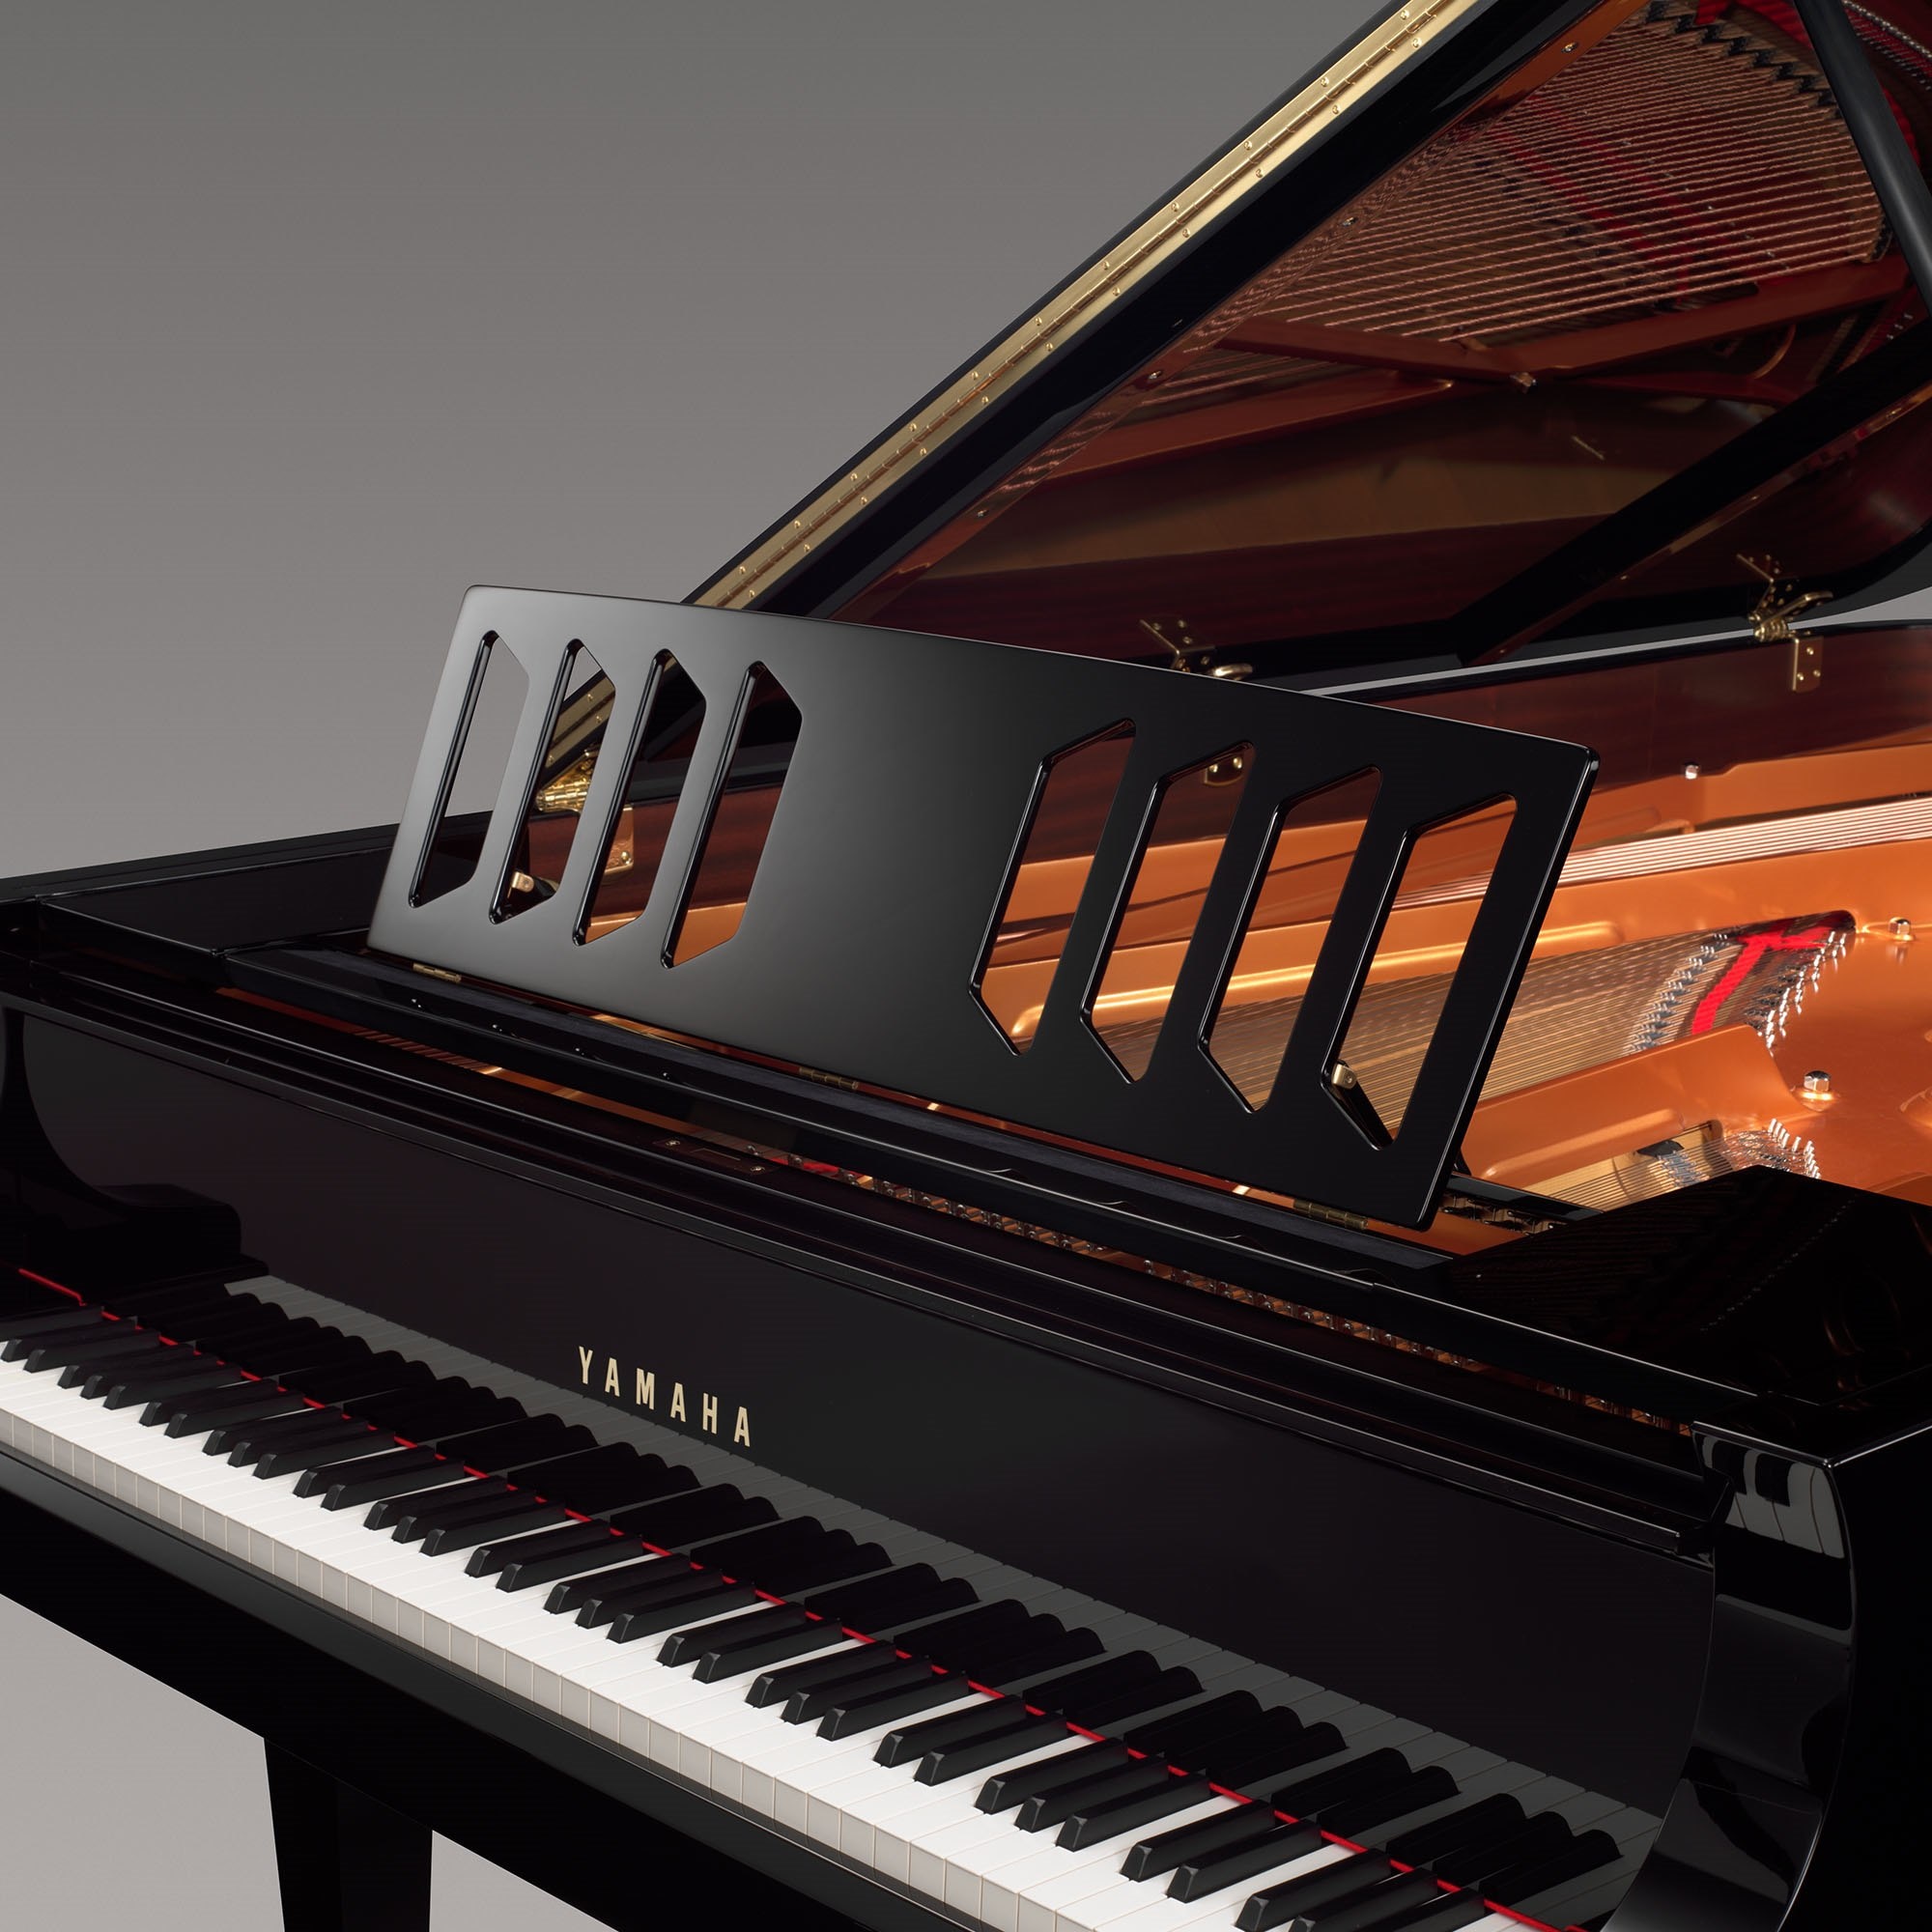 ekstra regeringstid tilfældig CFX - Accessories - GRAND PIANOS - Pianos - Musical Instruments - Products  - Yamaha - Other European Countries